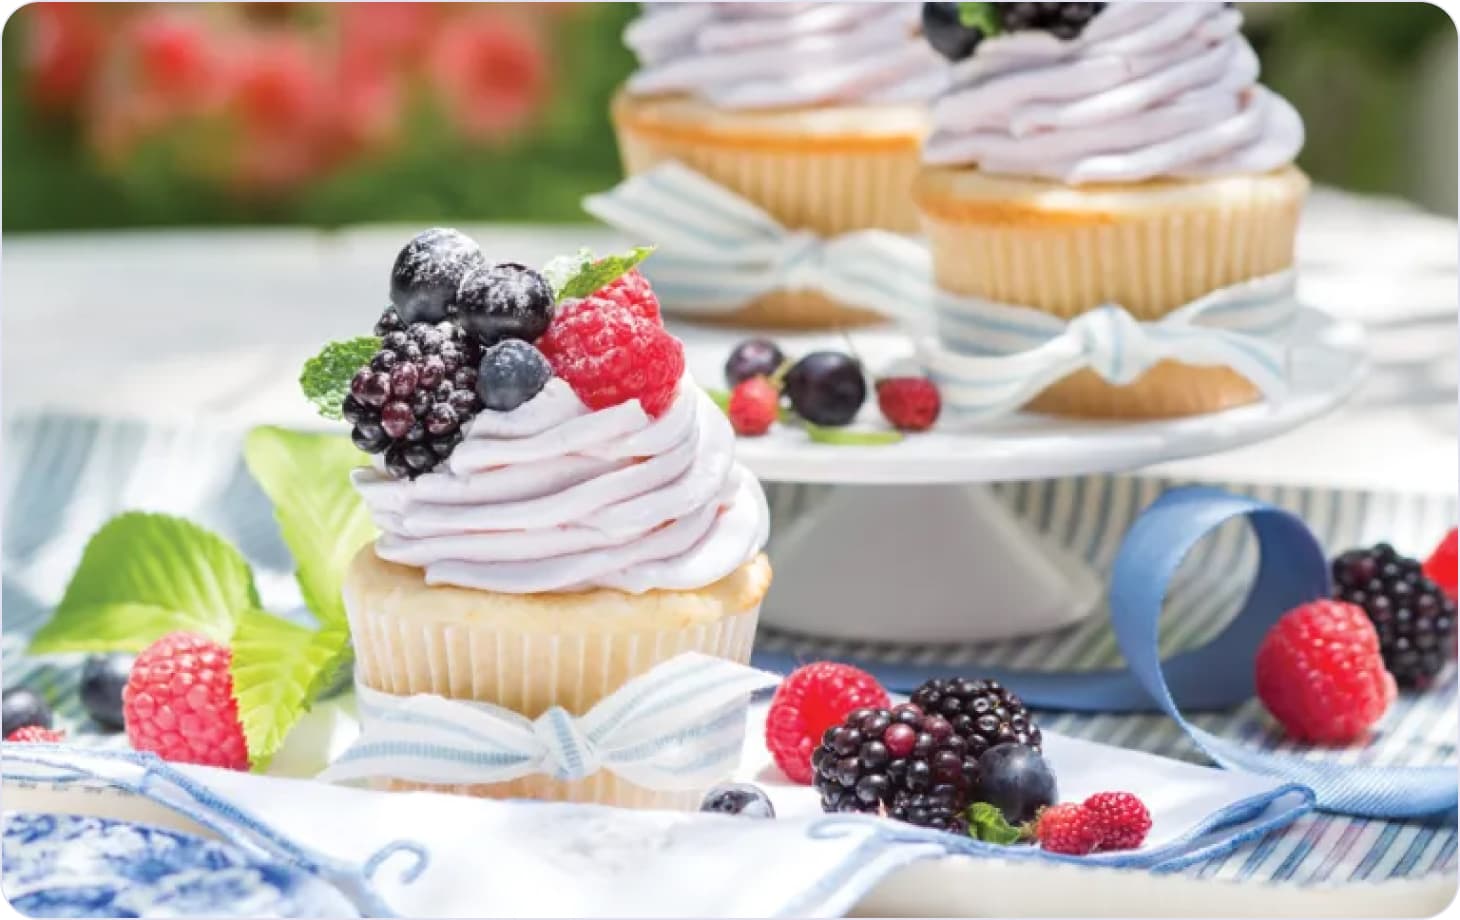 Cupcake decorated with cream, blackberries and mint